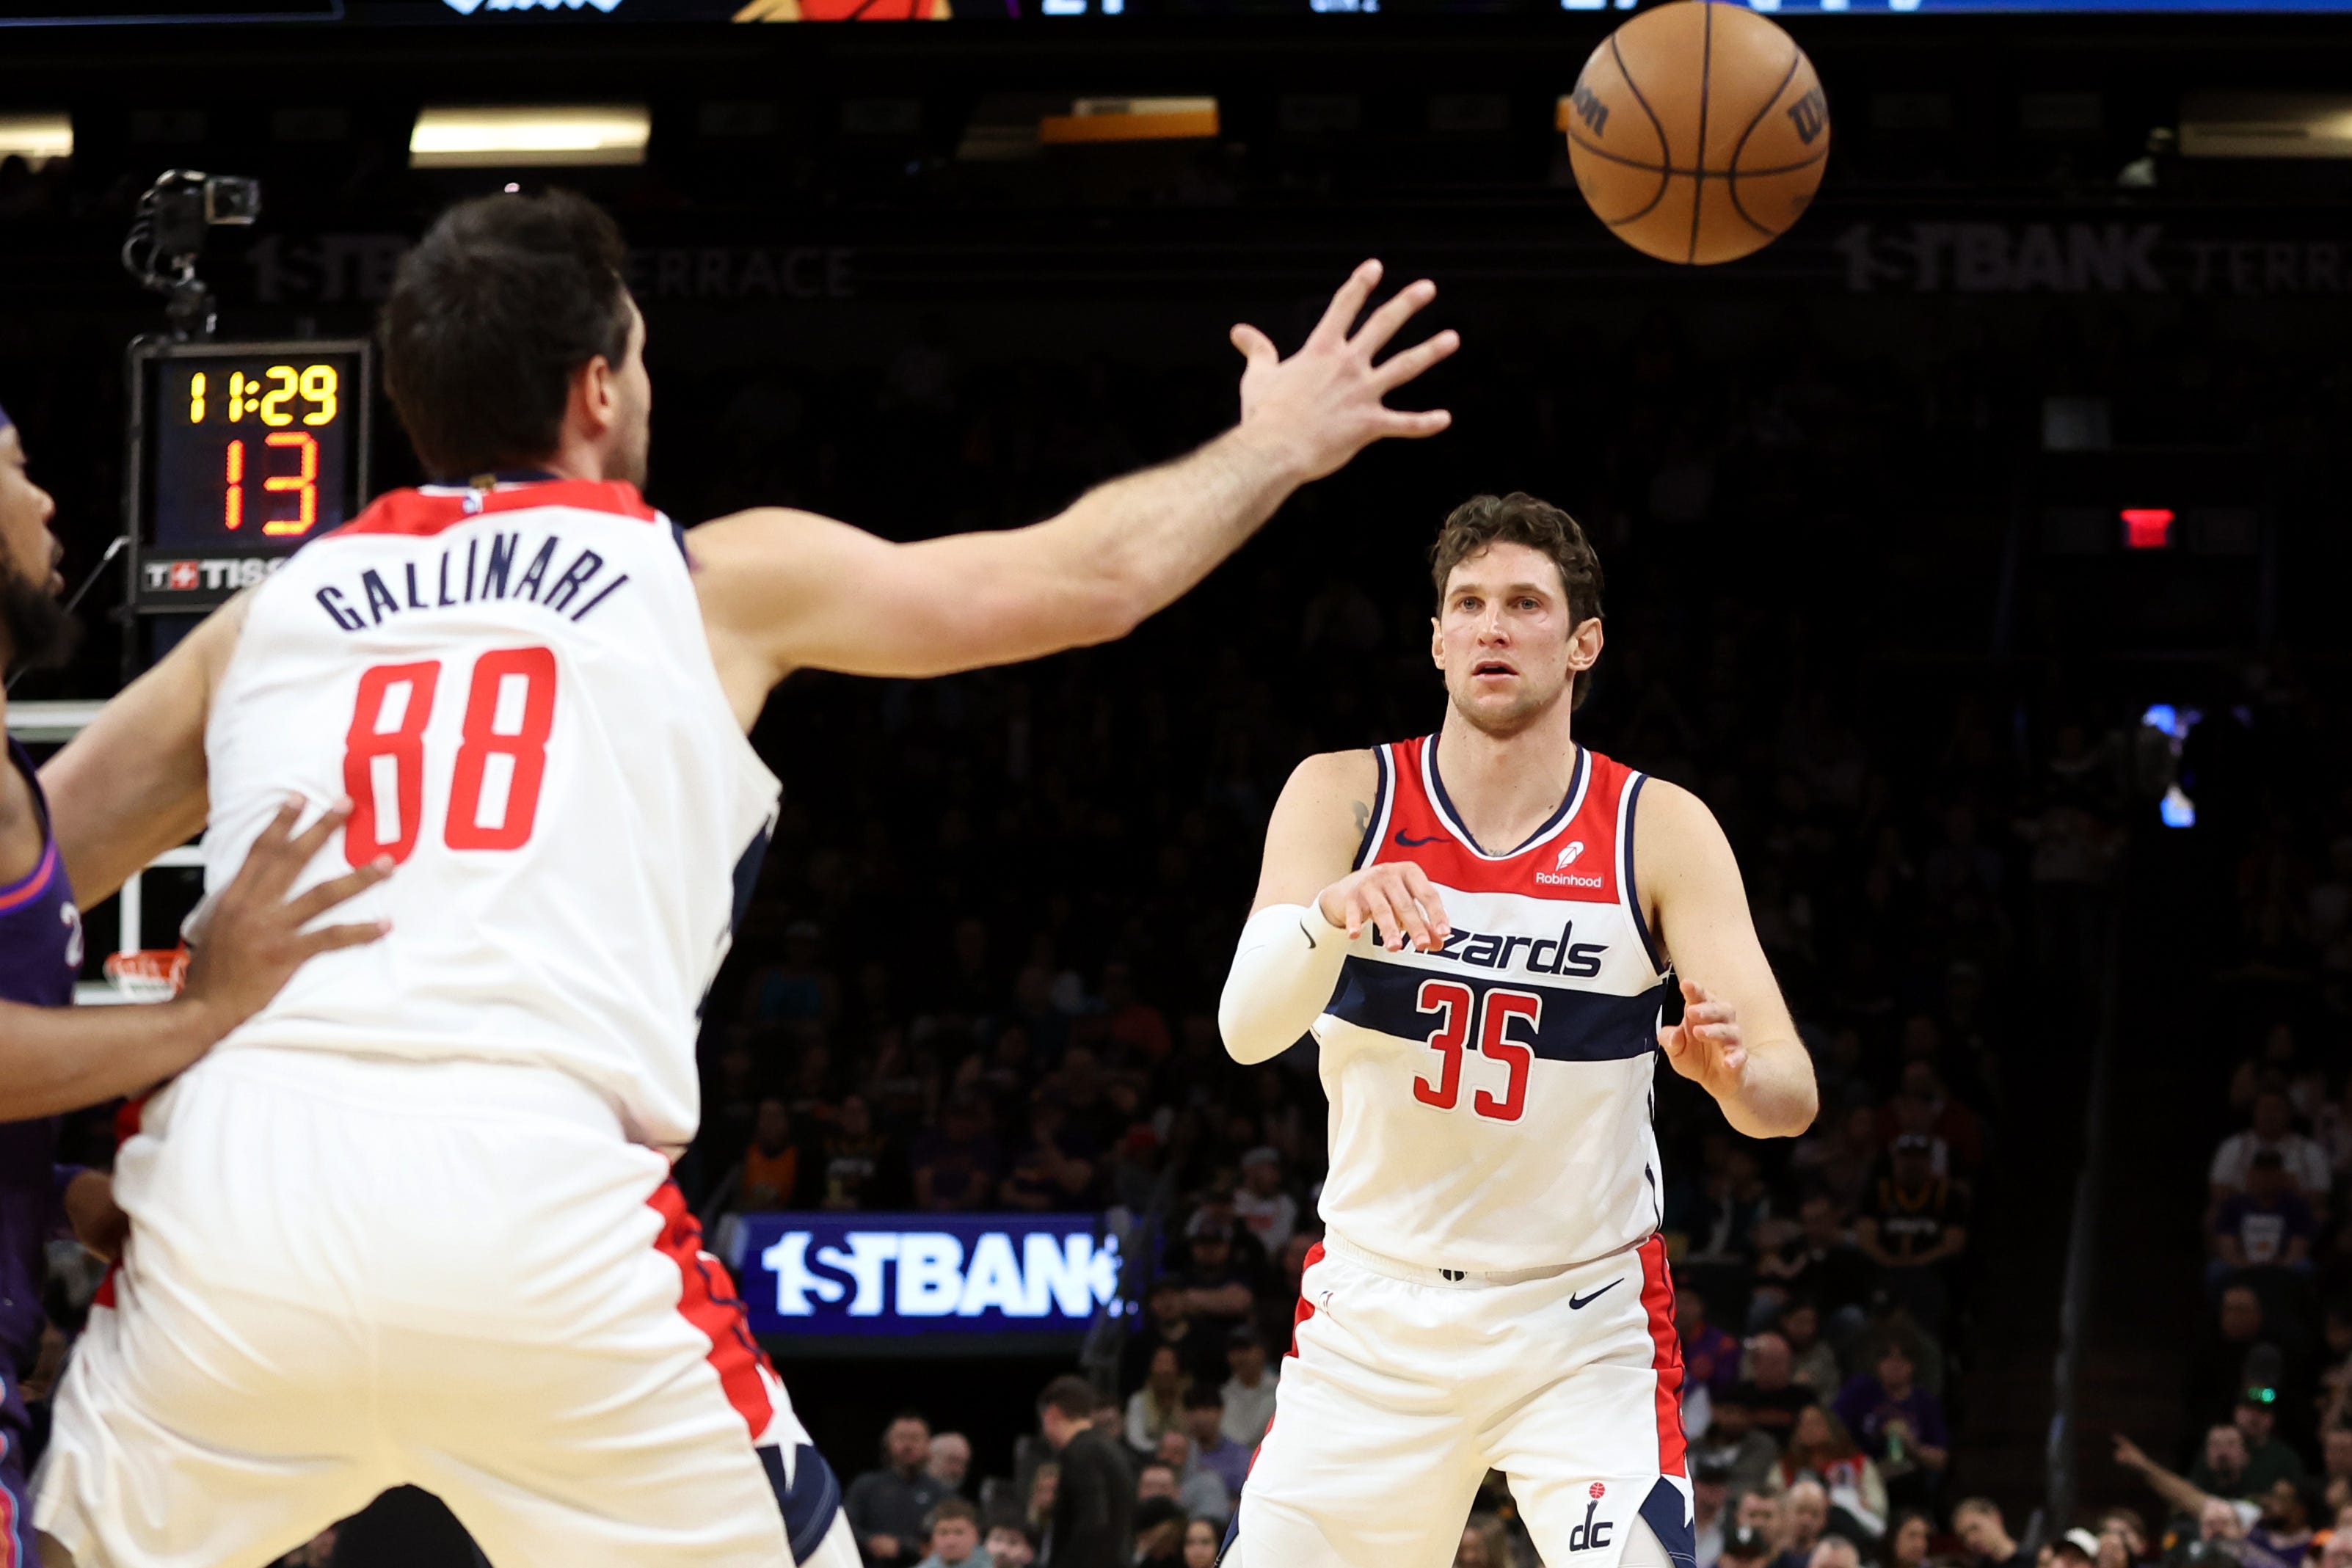 nba trade tracker: wizards, pistons make deal; who else is on the move ahead of deadline?